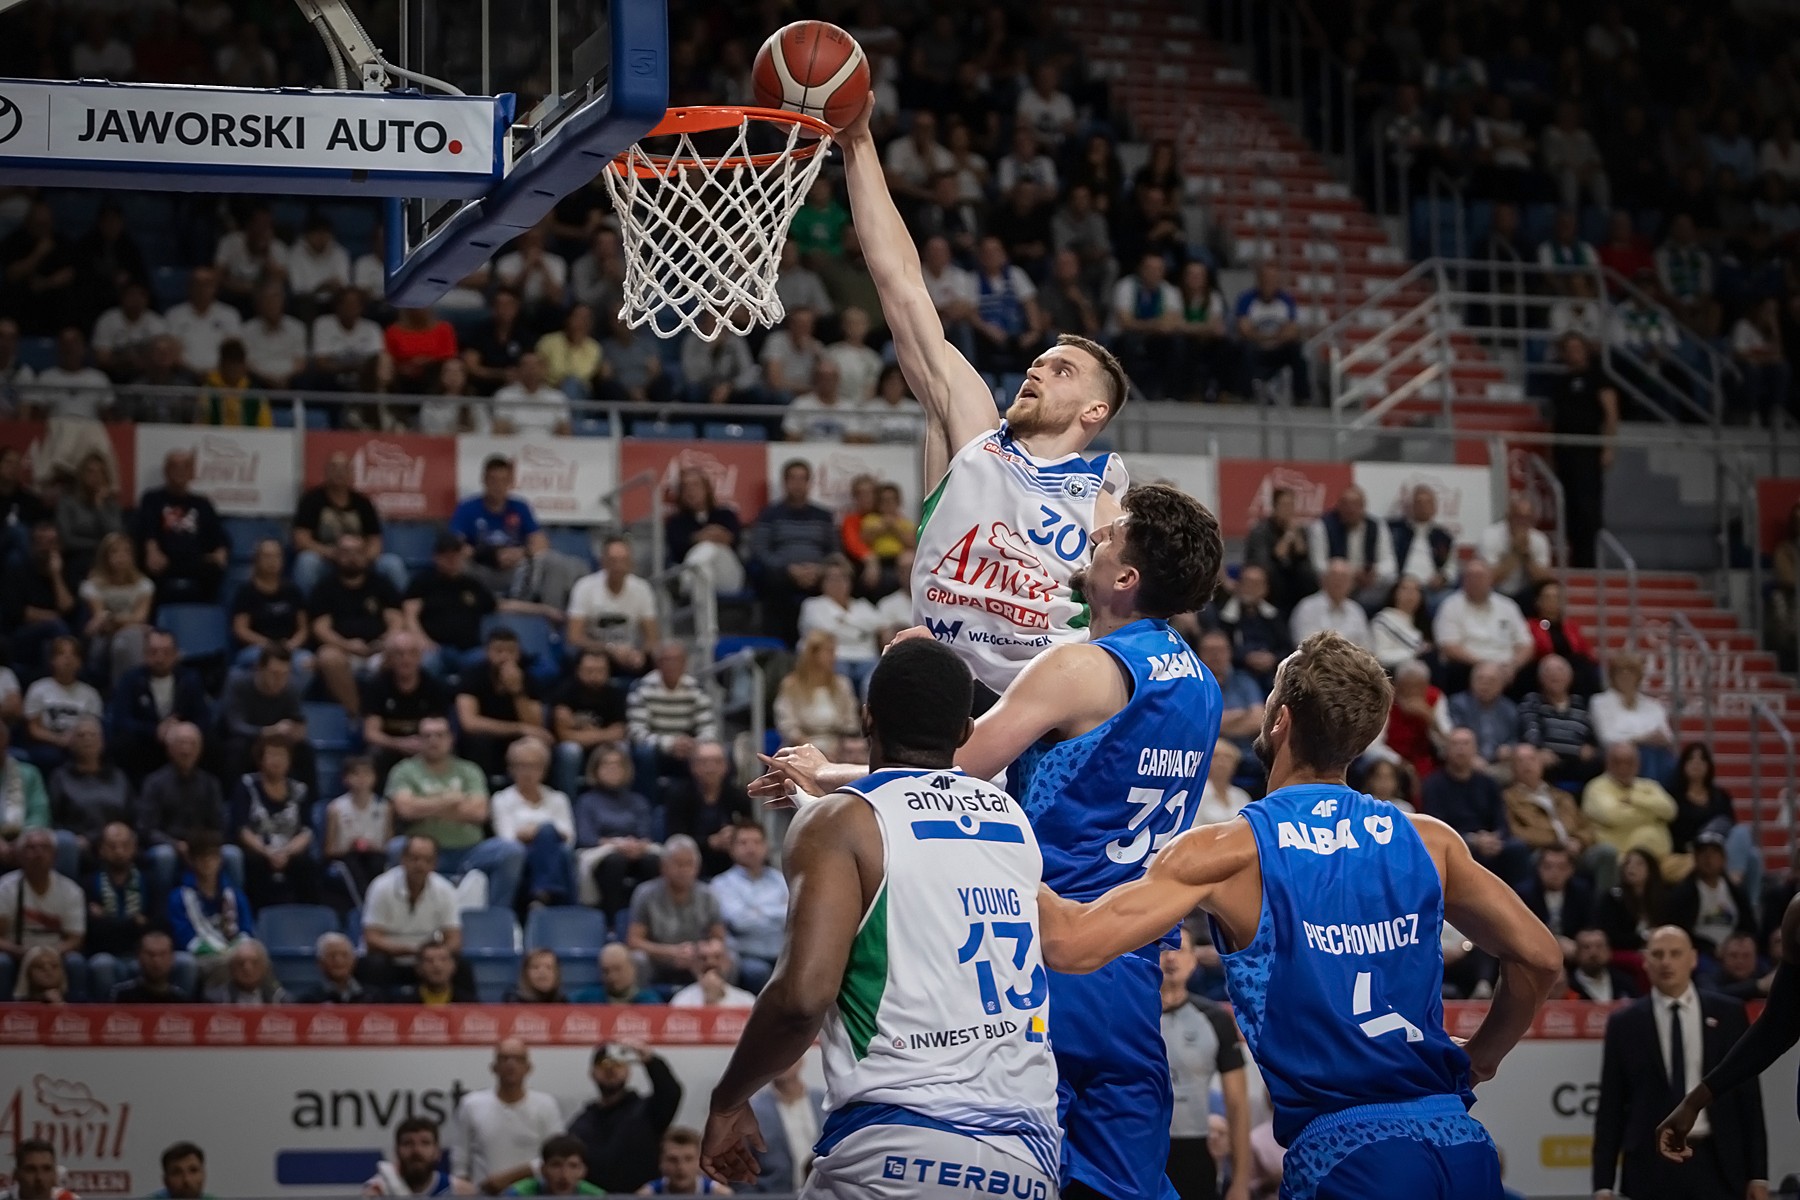 Emotional & Spectacular - Anwil For The Third Time!